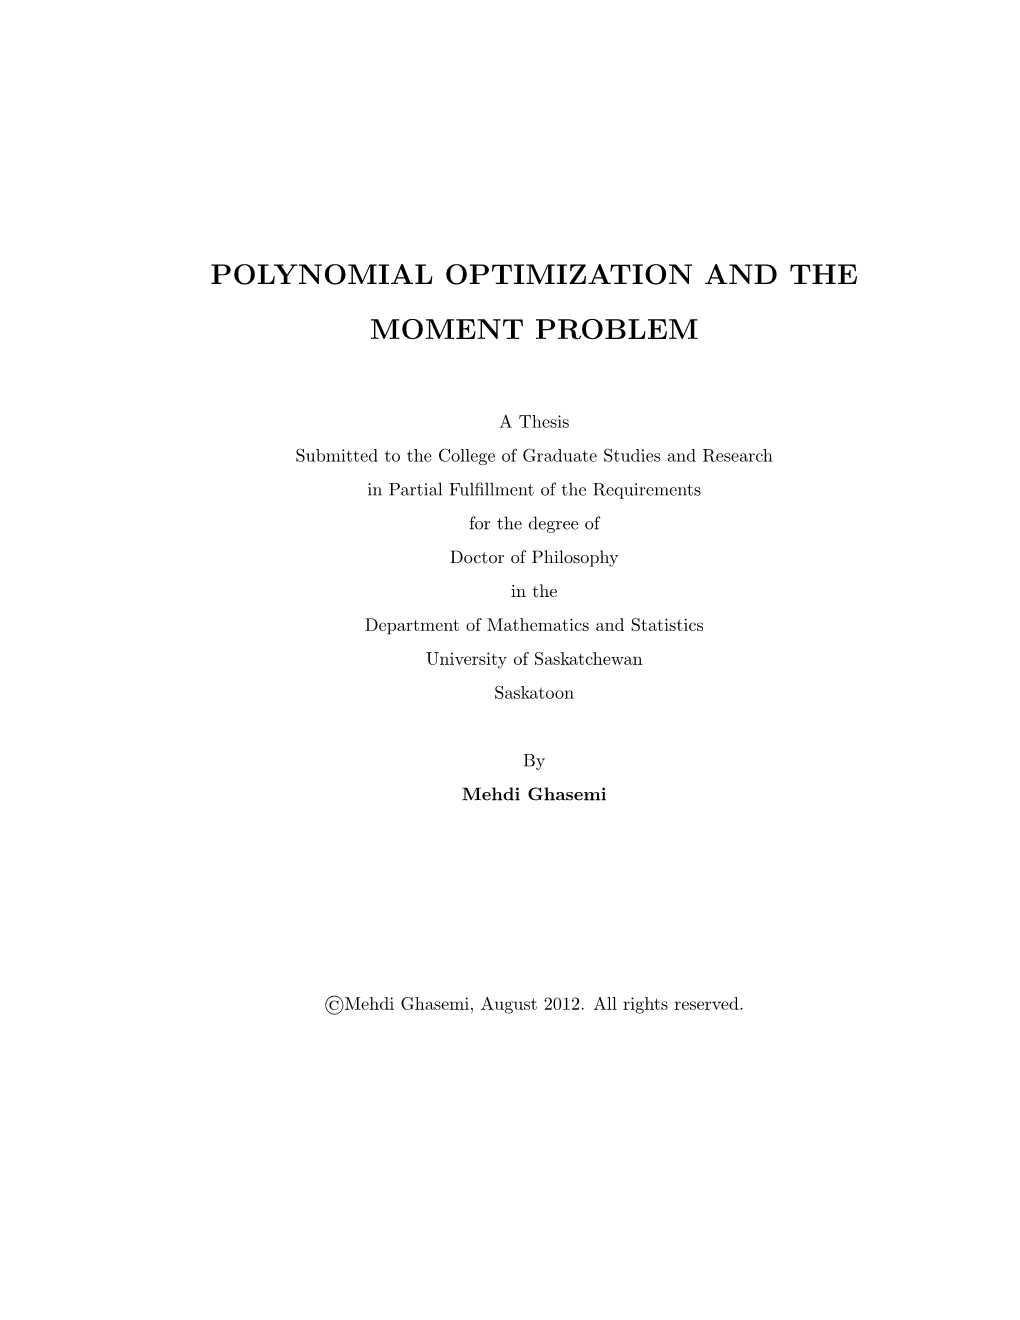 Polynomial Optimization and the Moment Problem